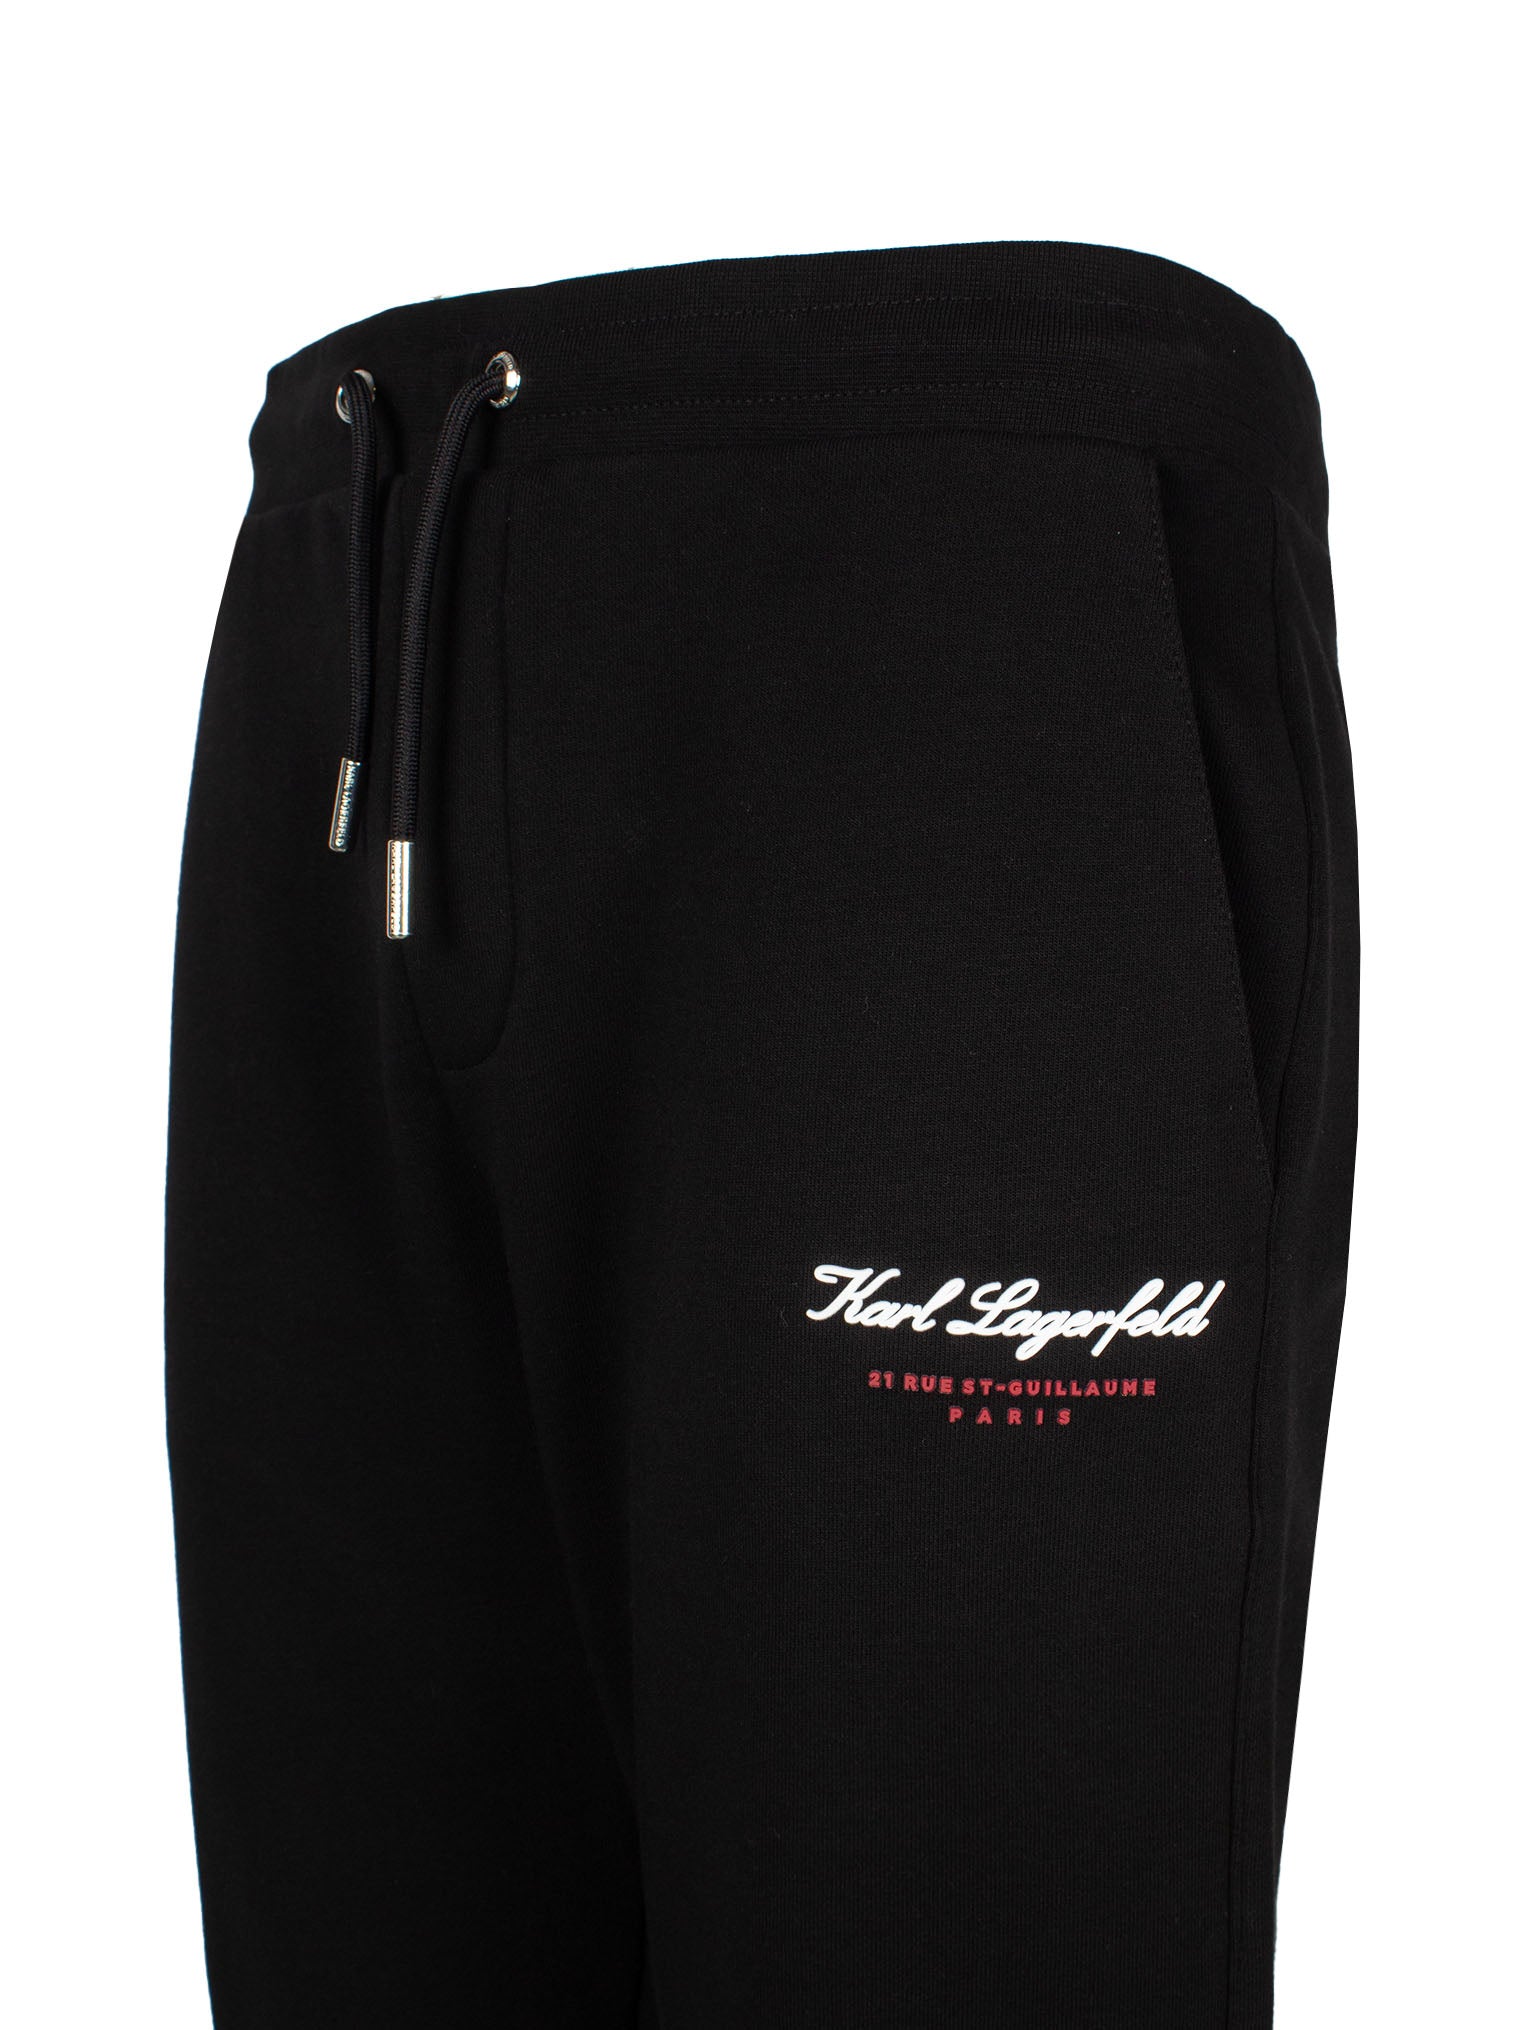 KARL LAGERFELD LOGO-EMBROIDERED TRACK PANTS